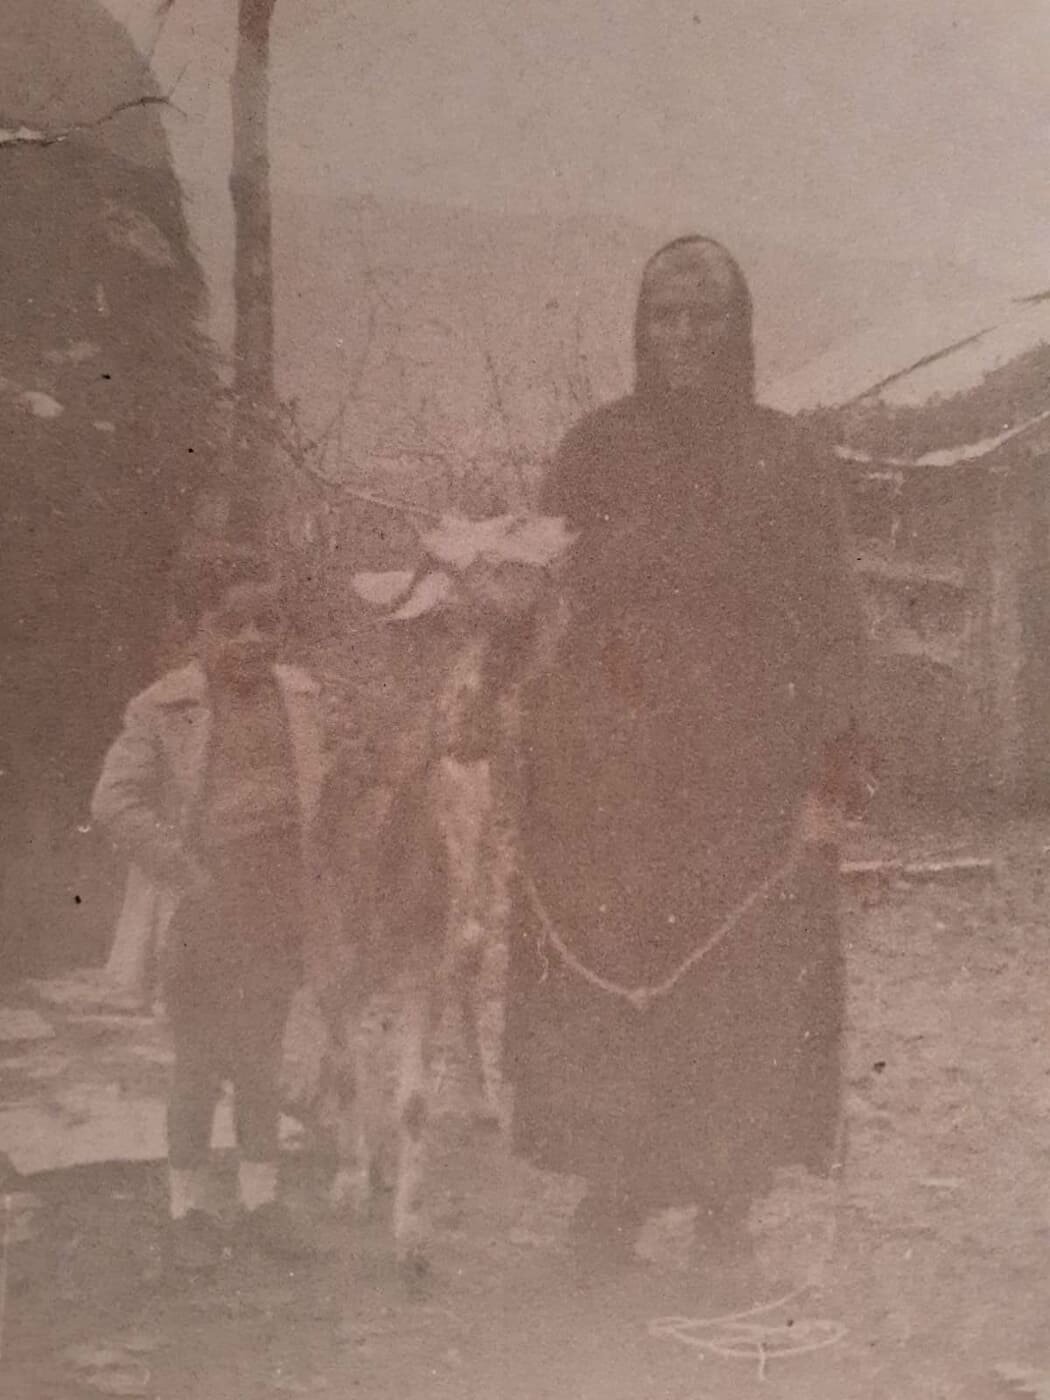   There is the goat which suckled my grandfather because his mother died during giving the birth  